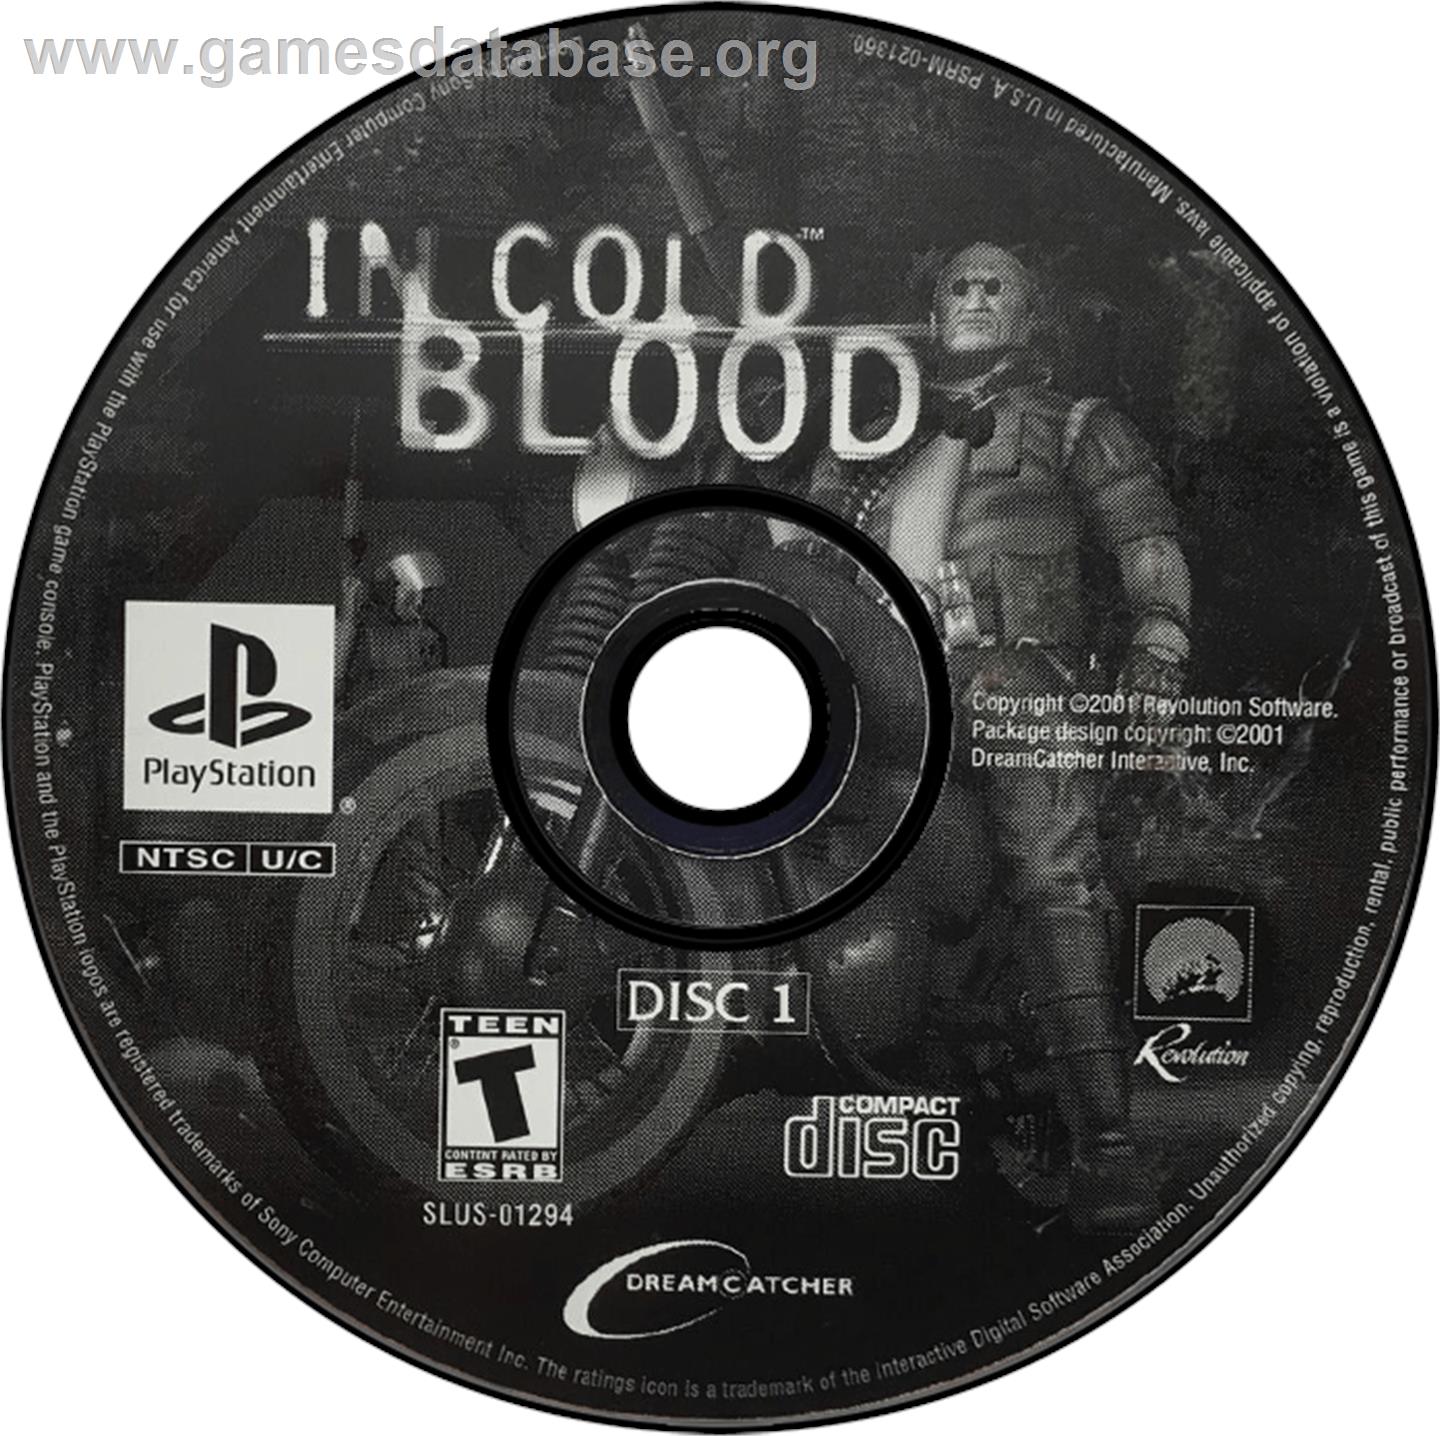 In Cold Blood - Sony Playstation - Artwork - Disc